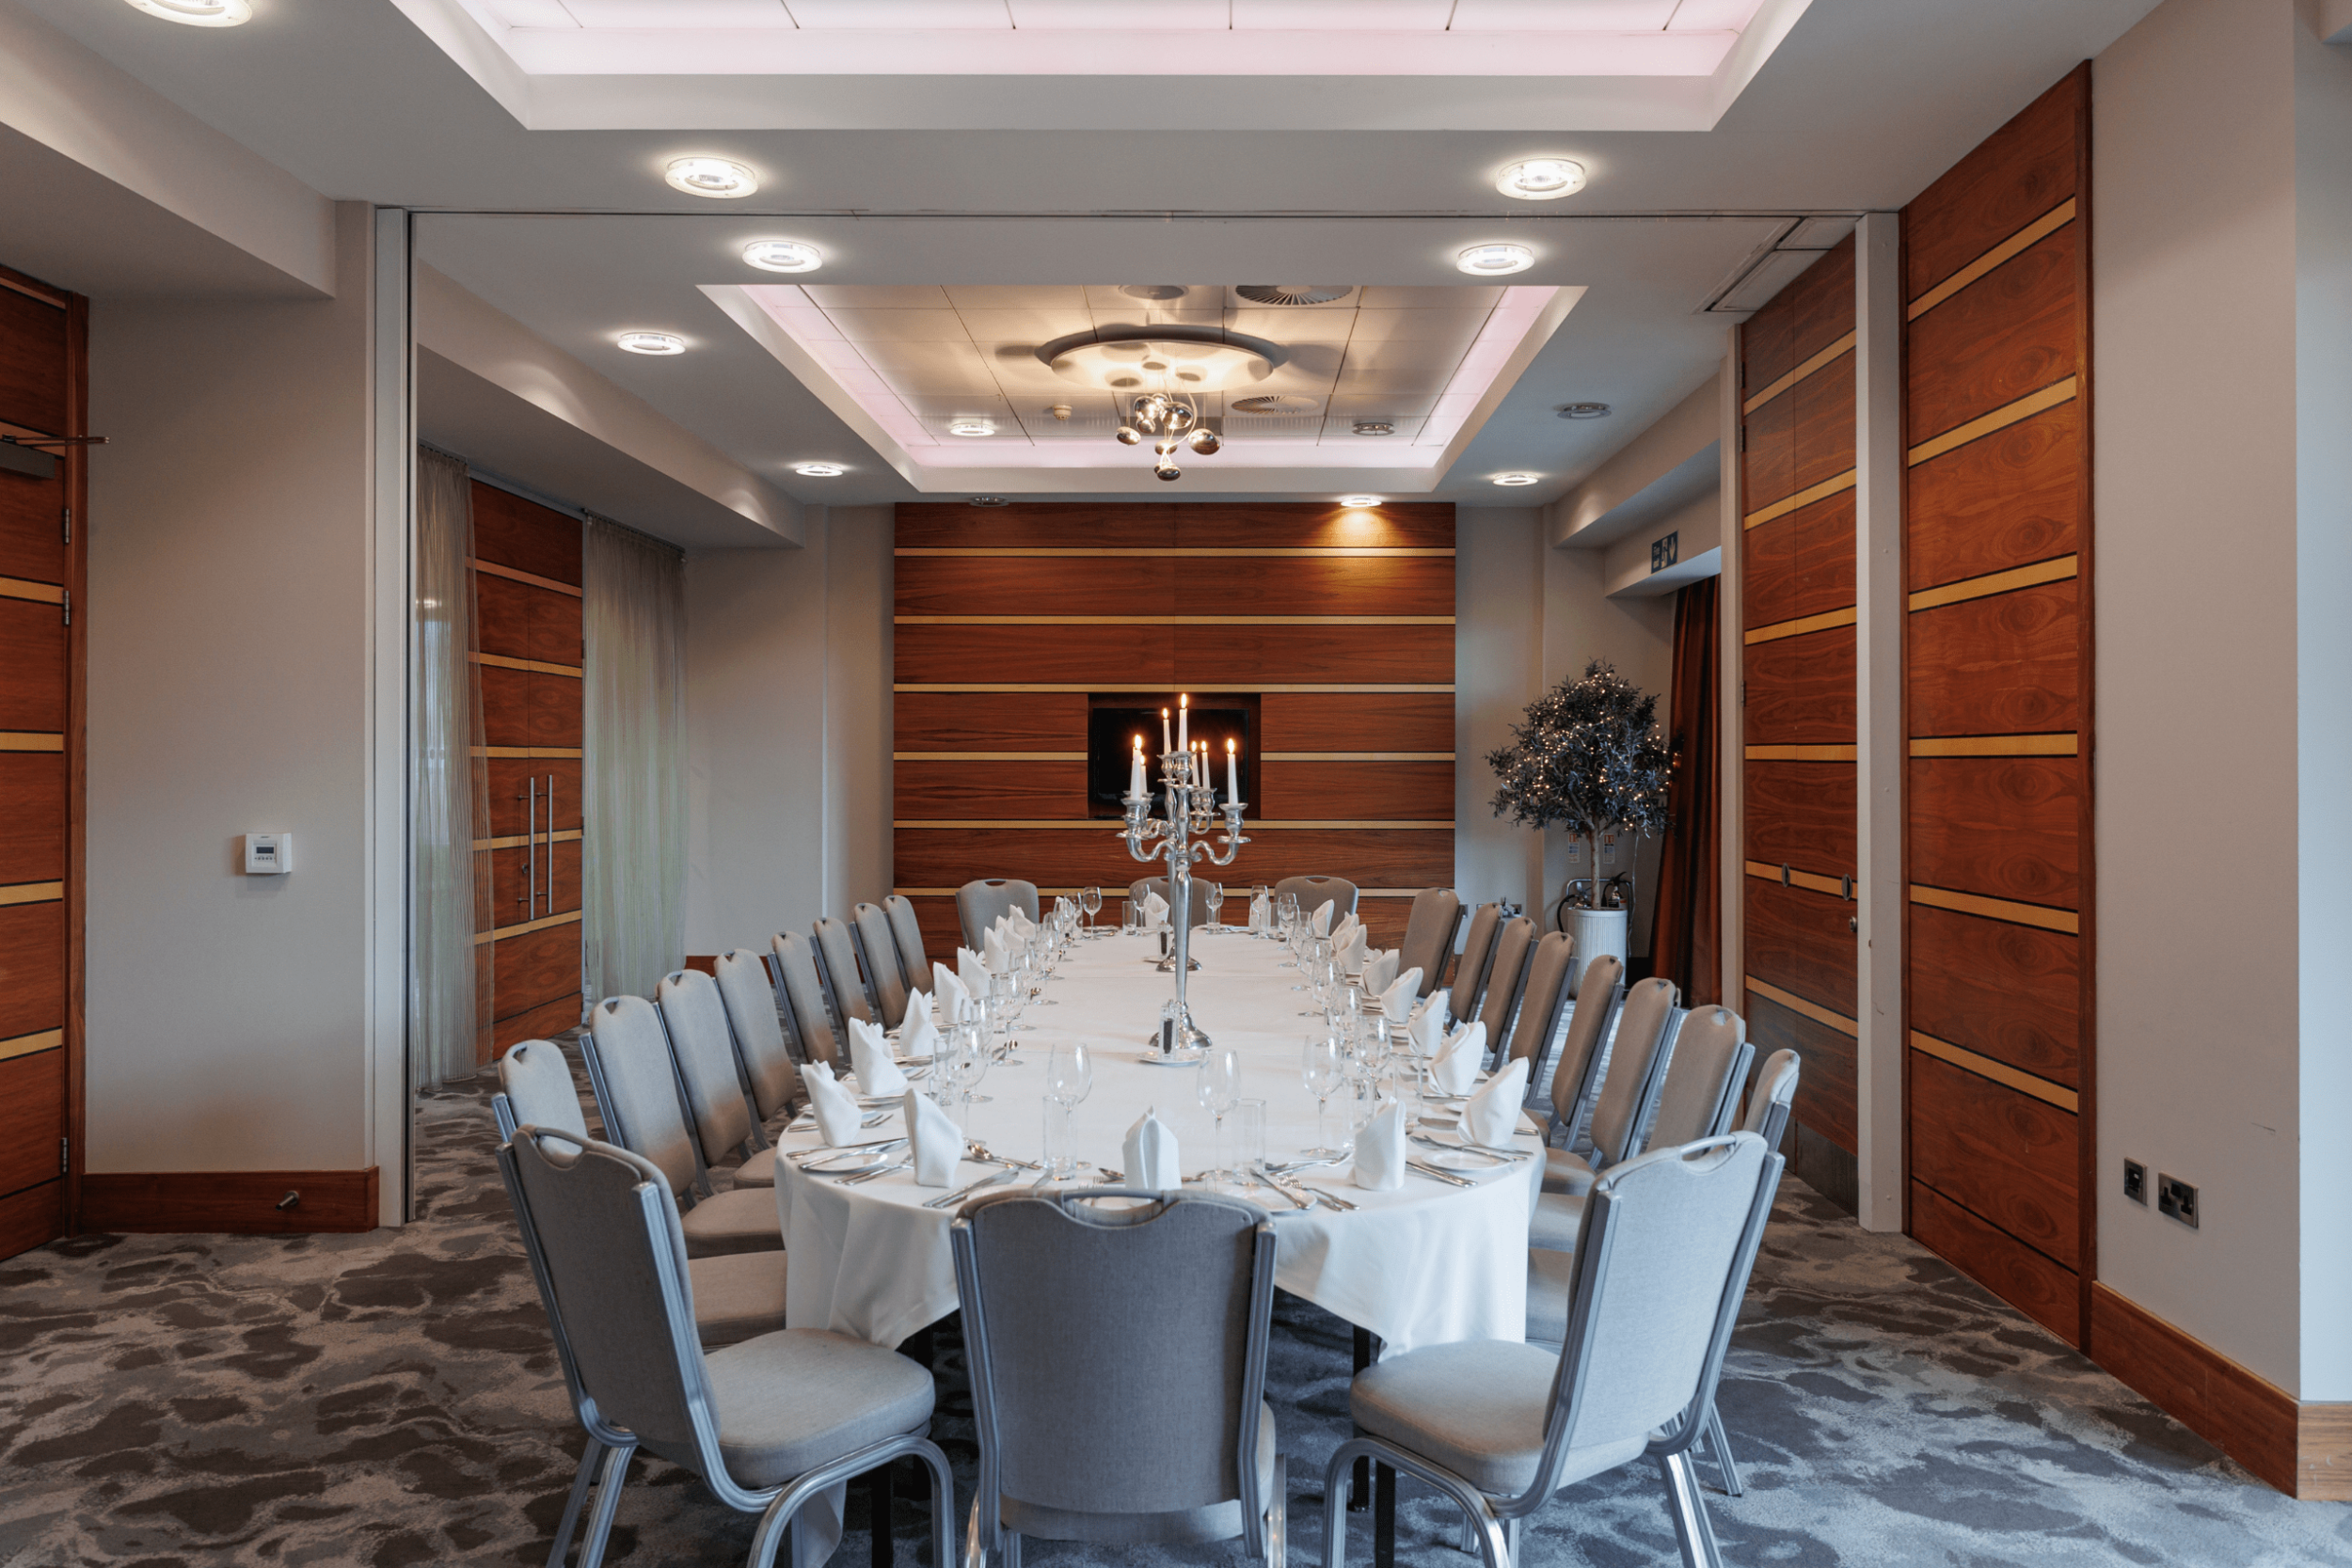 Casa Hotel conferencing and meeting space, Valencia Suite | Corporate events Chesterfield